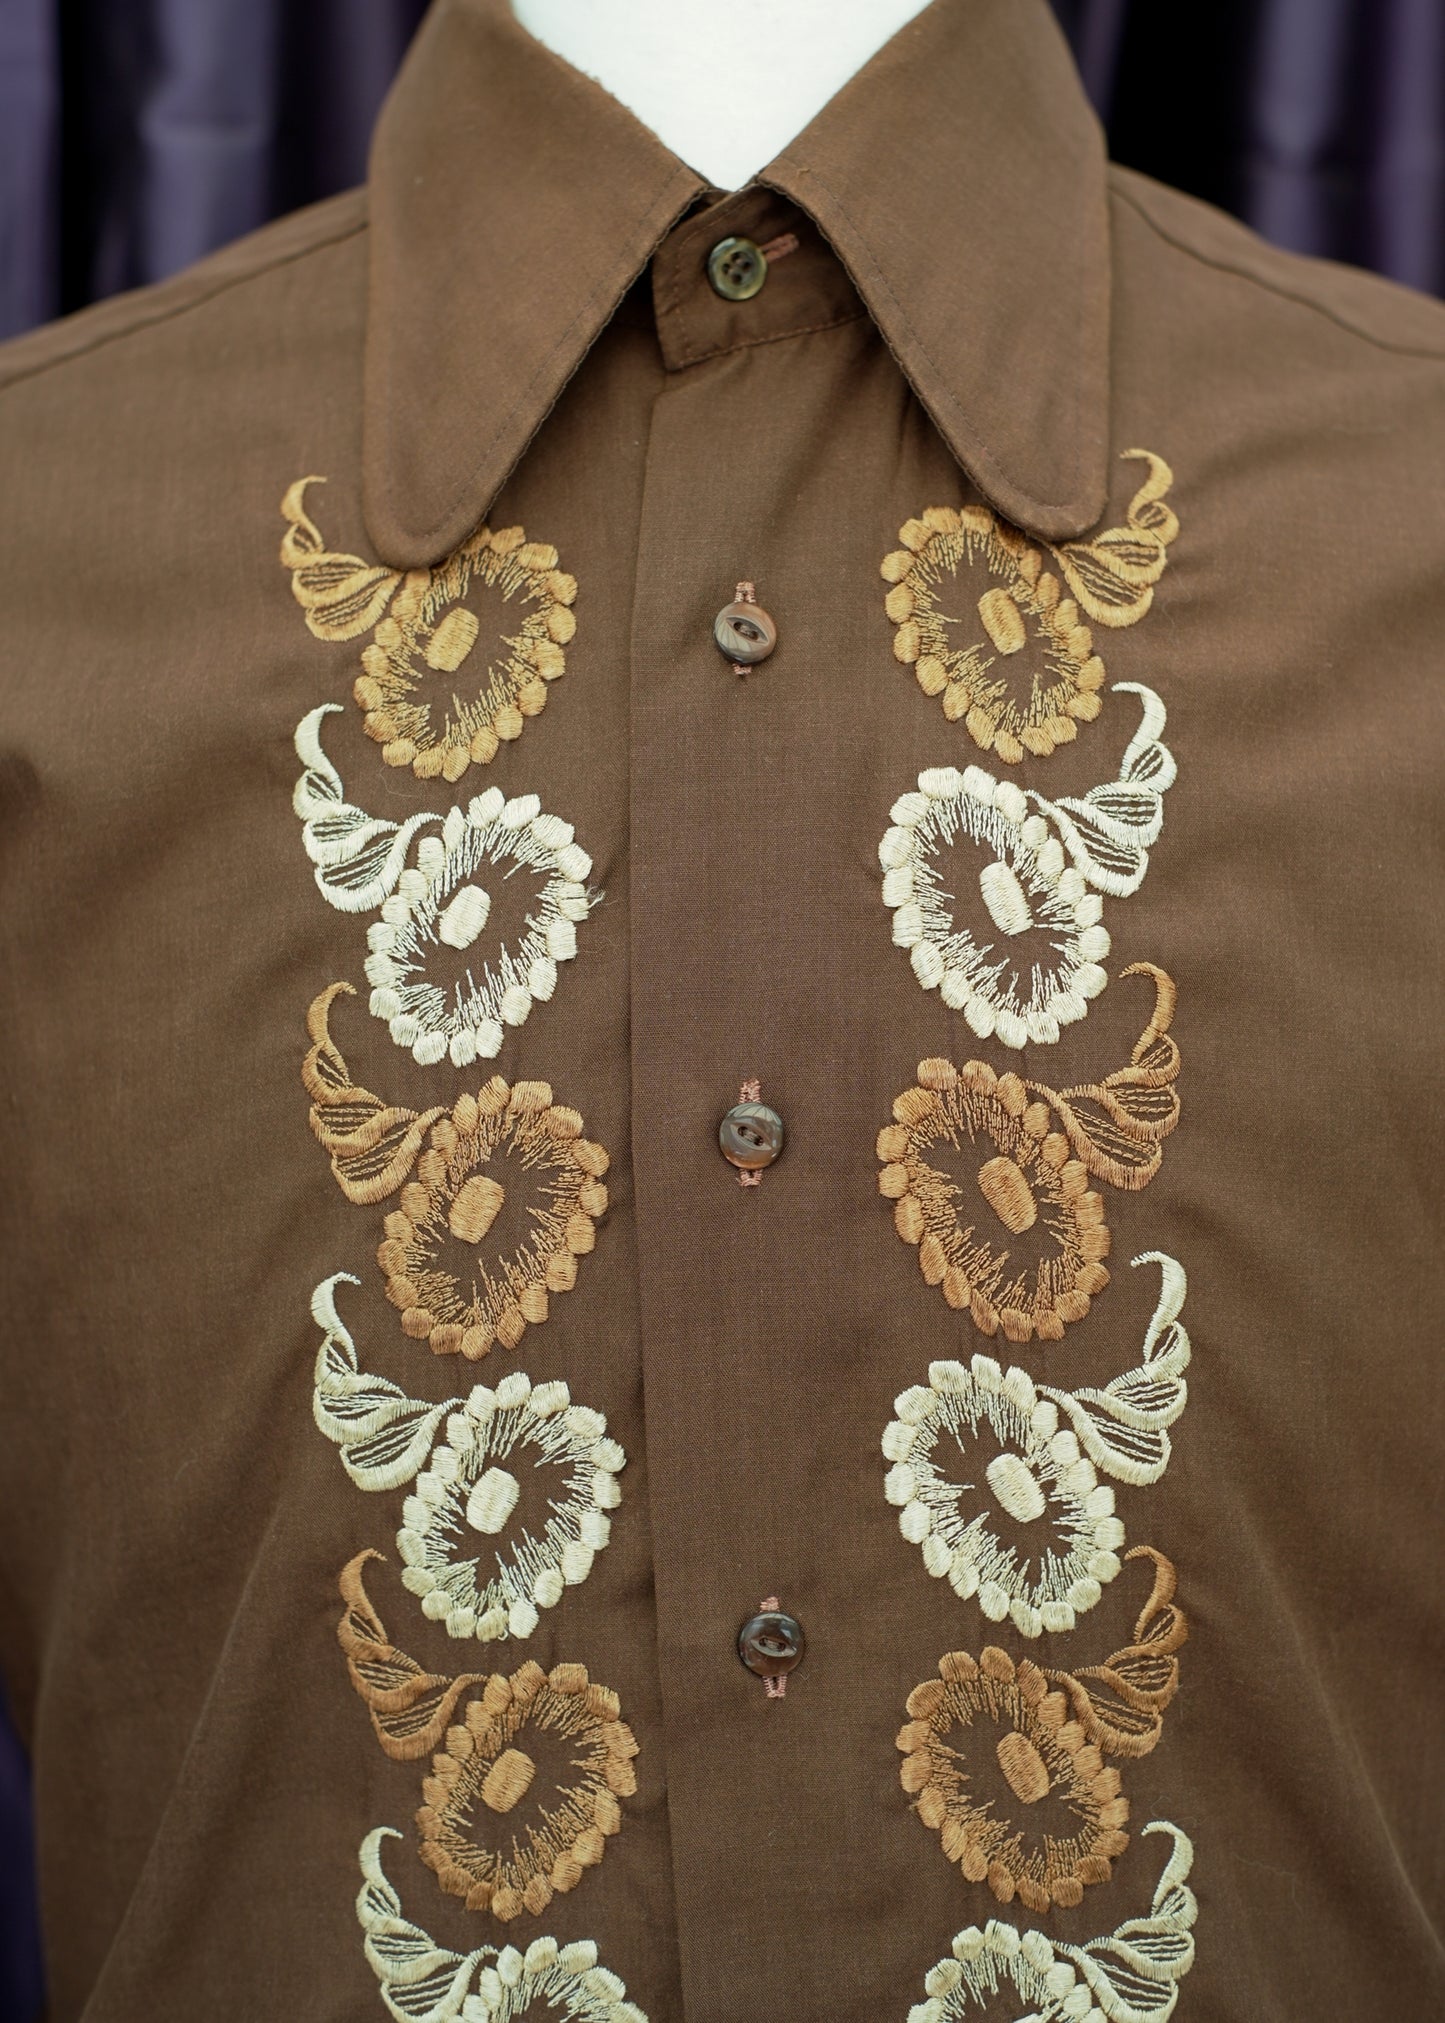 Vintage 60s Brown Embroidered Front Dress Shirt • Beagle Collar